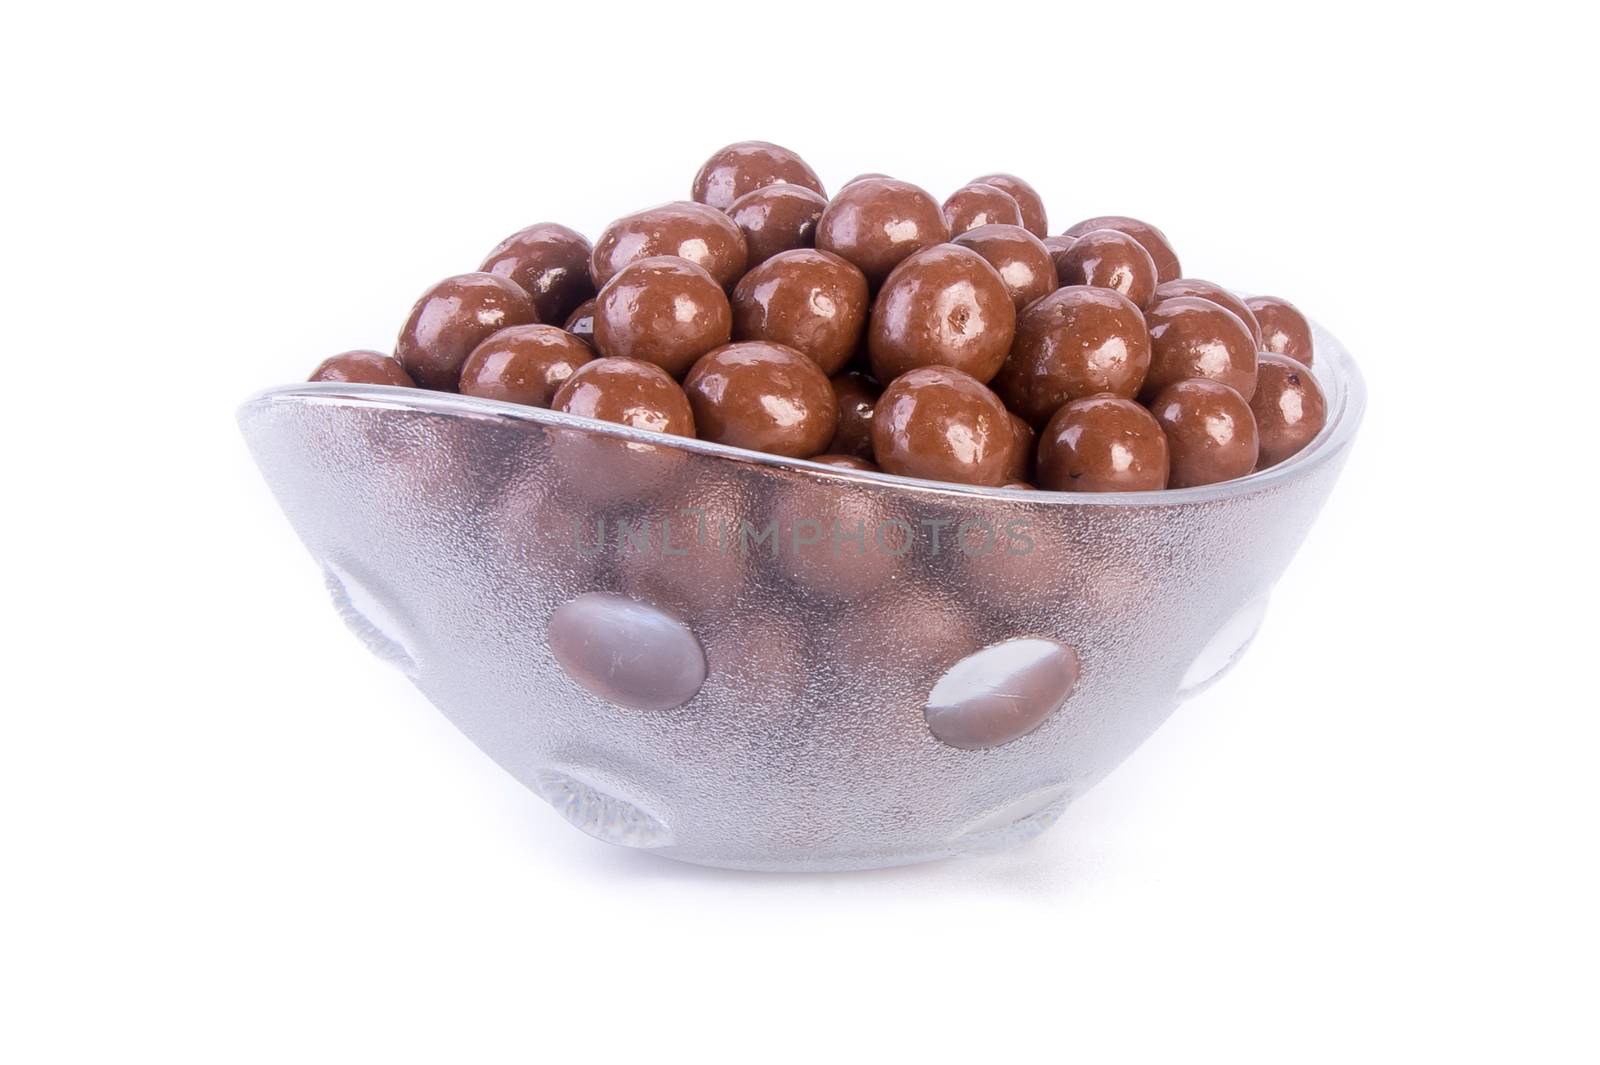 chocolate balls. chocolate balls in bowl on a background.